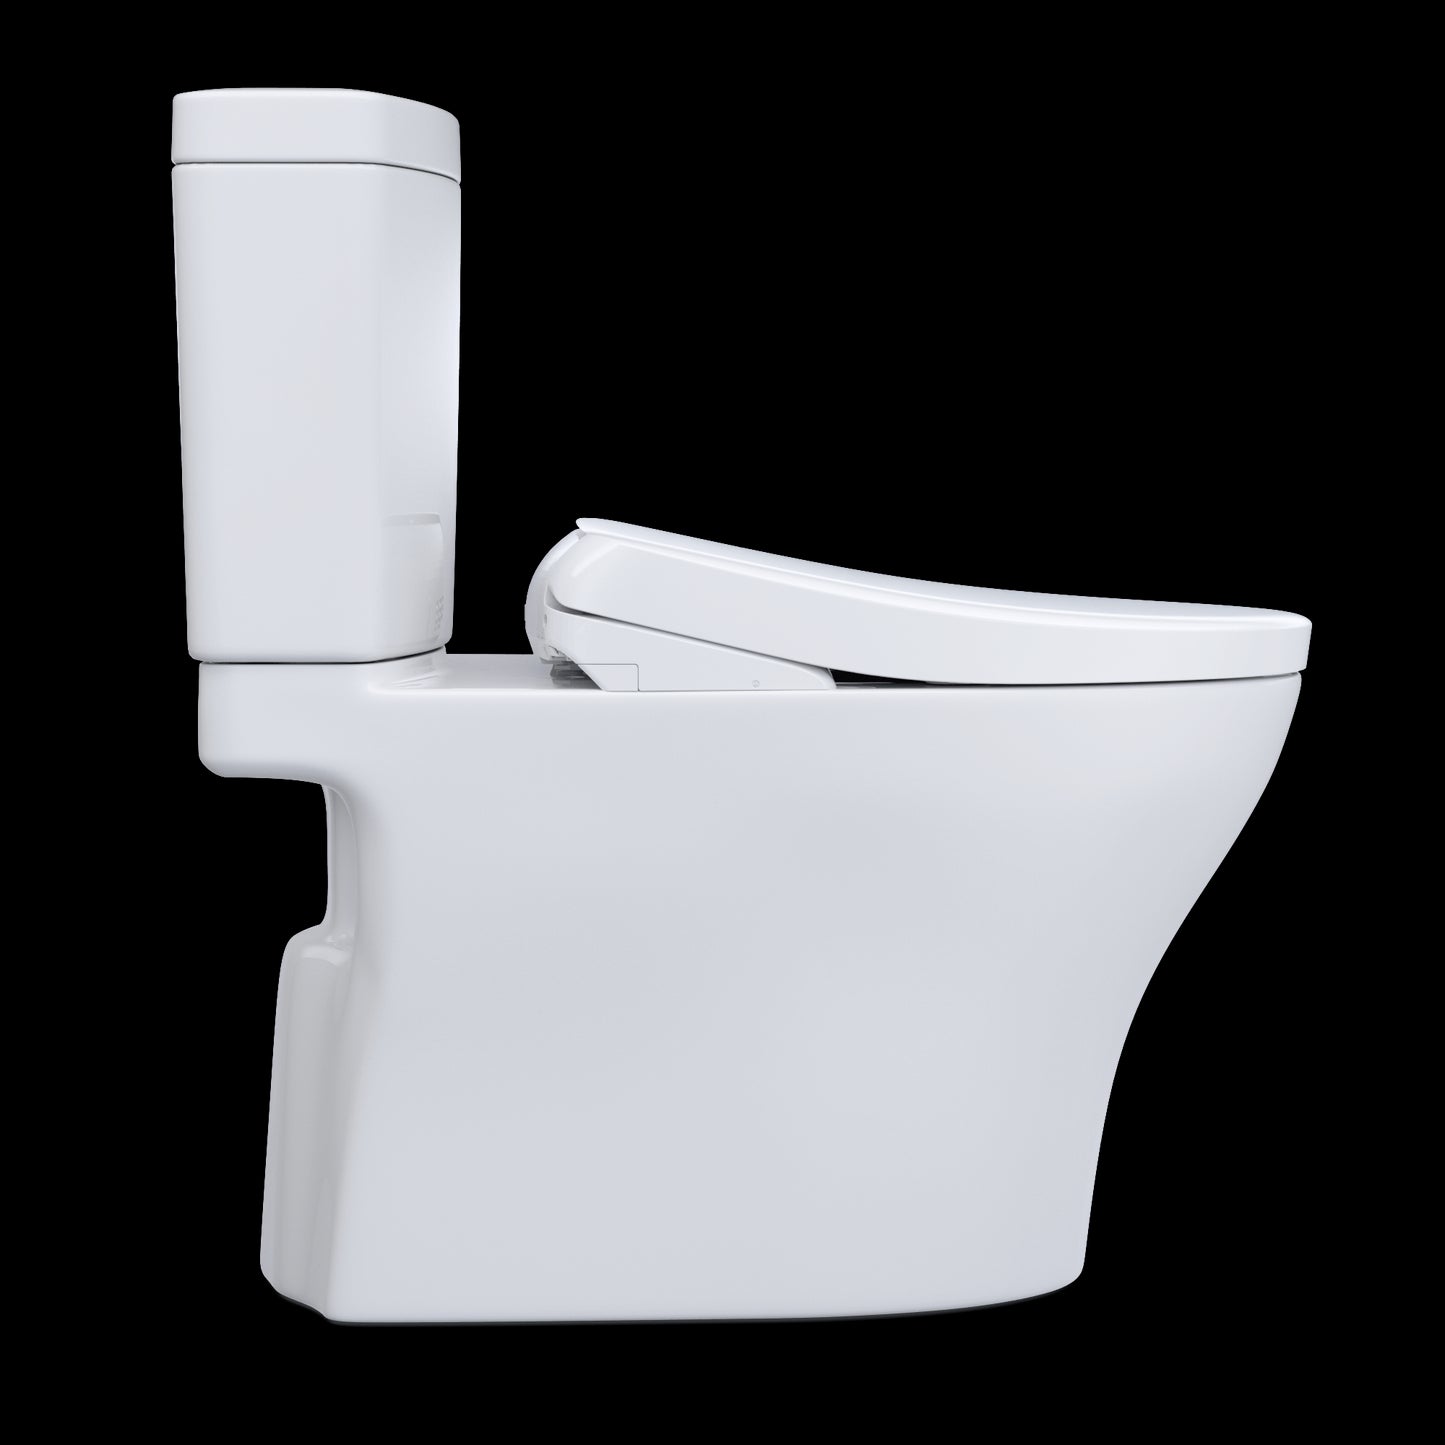 TOTO Aquia 1.28 and 0.9 GPF with S7 Contemporary Bidet Seat | MW4464726CEMFGN